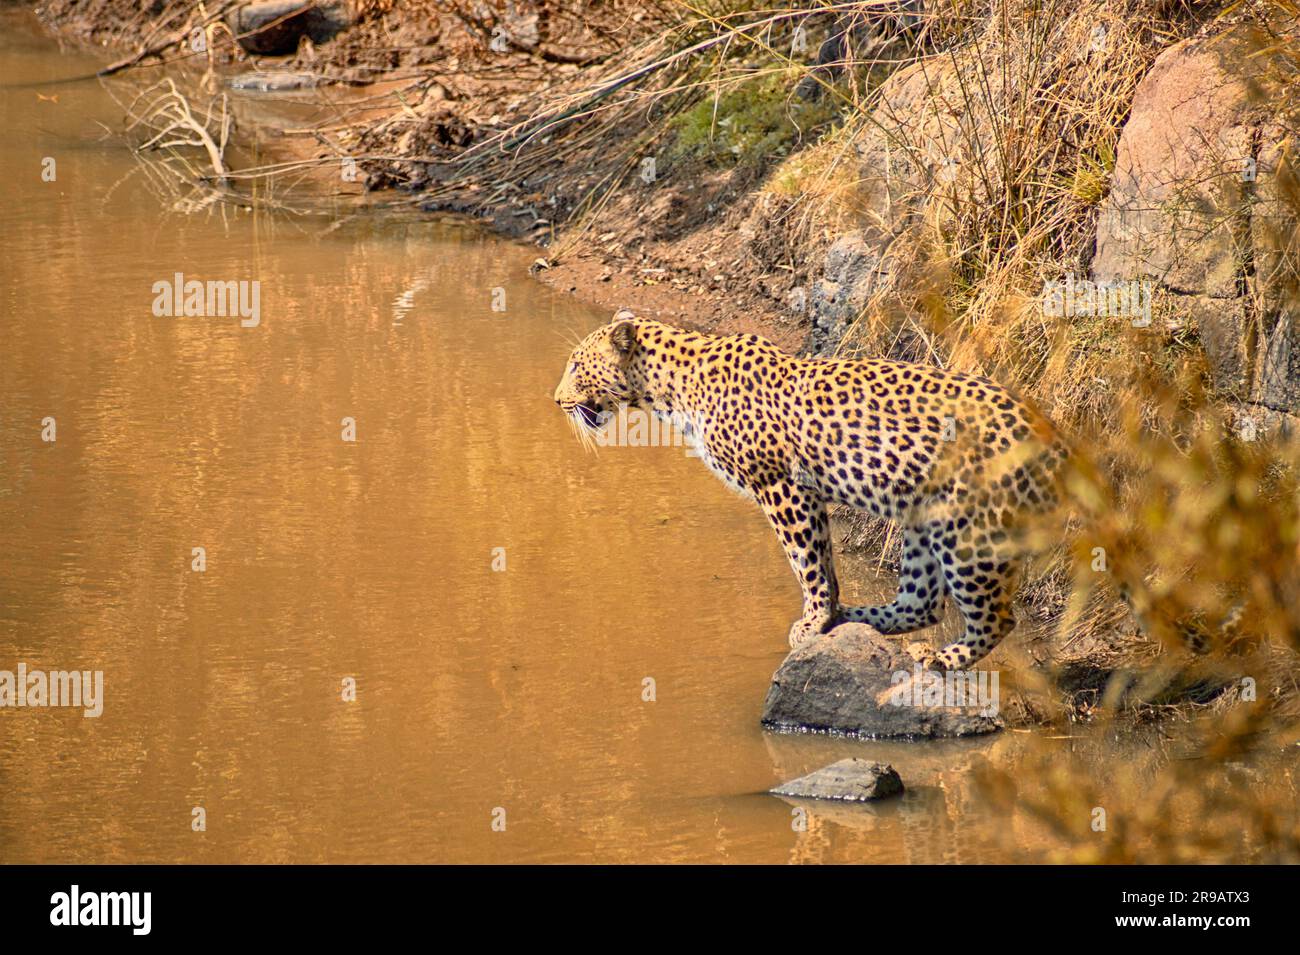 Leopard fishing in a small waterhole in the dry Africa nature in the summertime Stock Photo